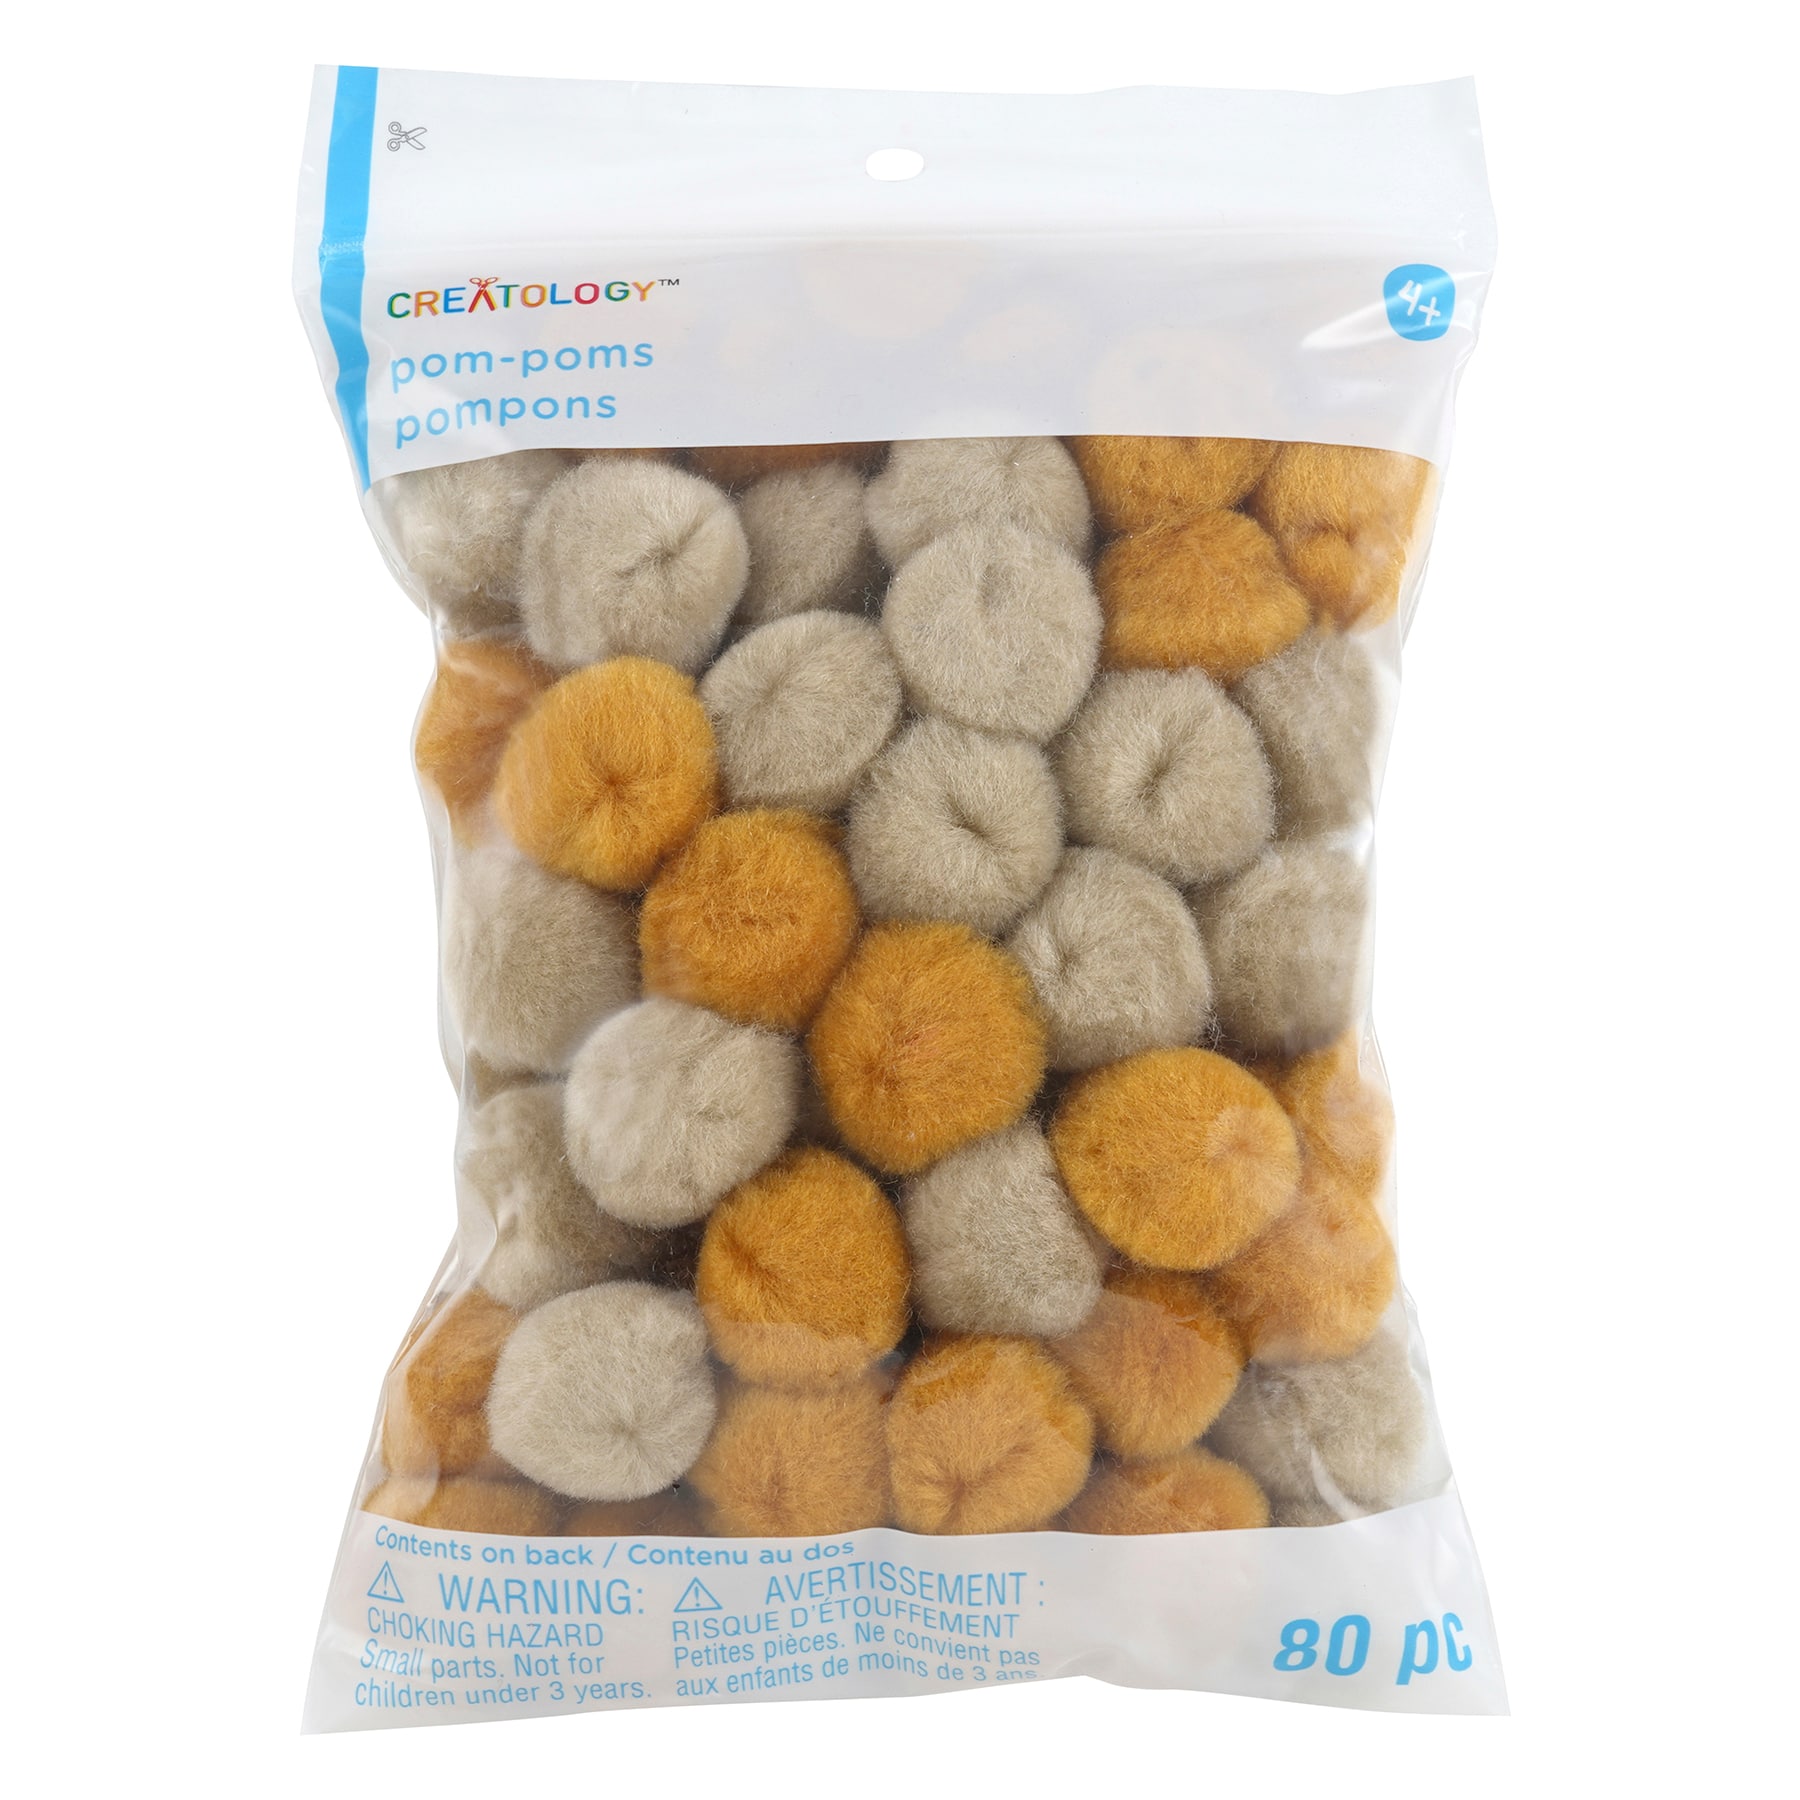 24 Packs: 65 ct. (1,560 total) 1/2 Mixed Brown Pom Poms by Creatology™ 